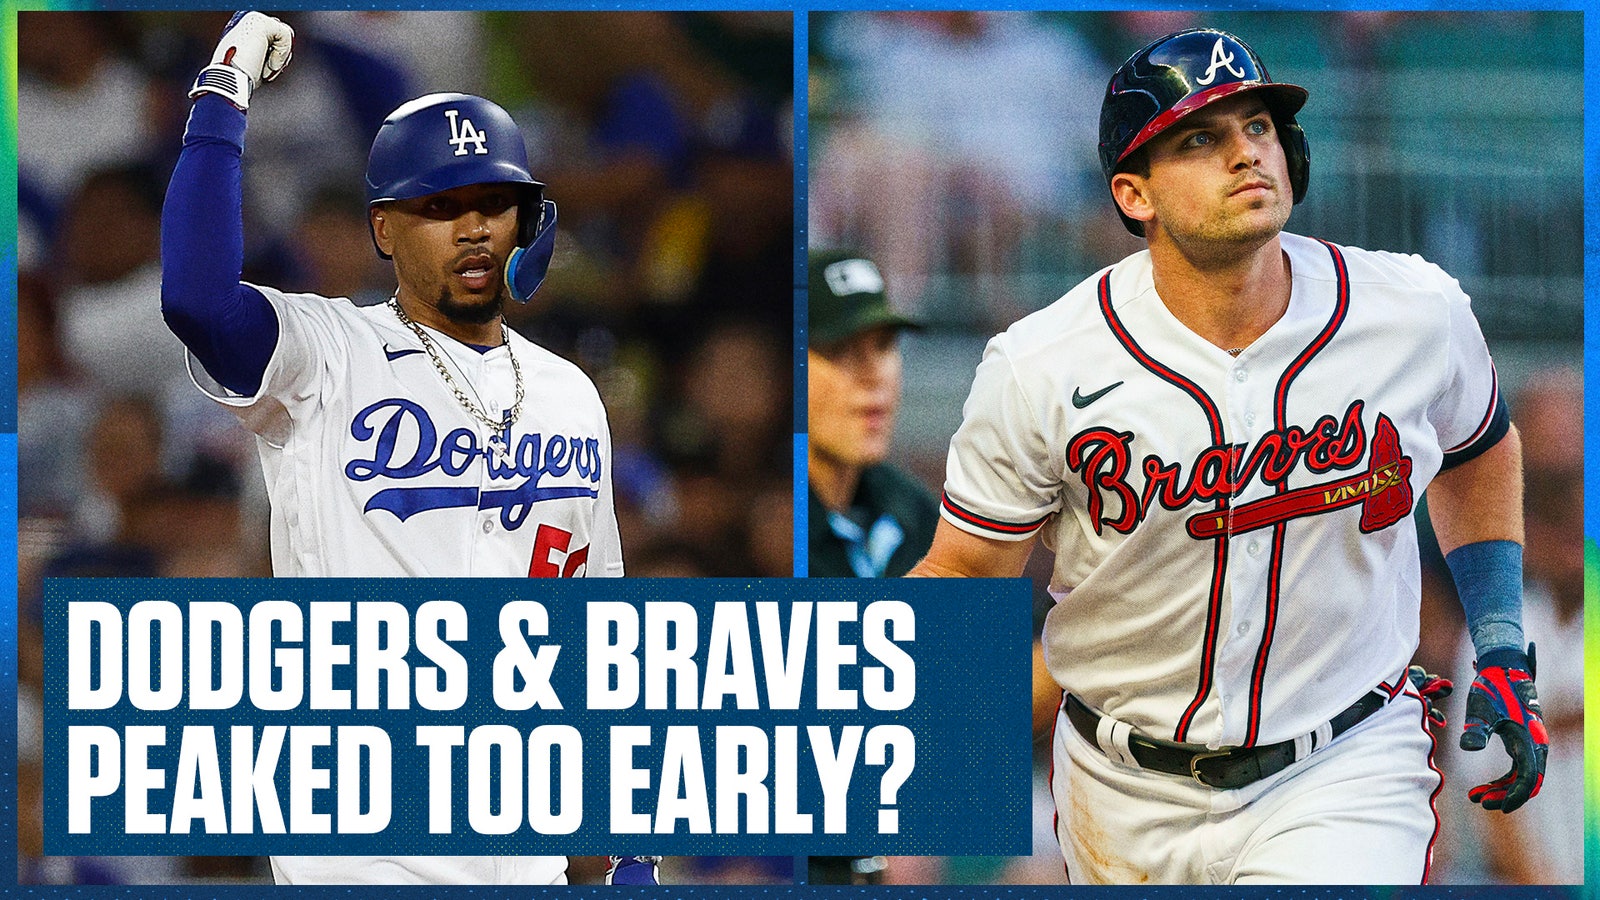 Have the Dodgers & Braves peaked too early?